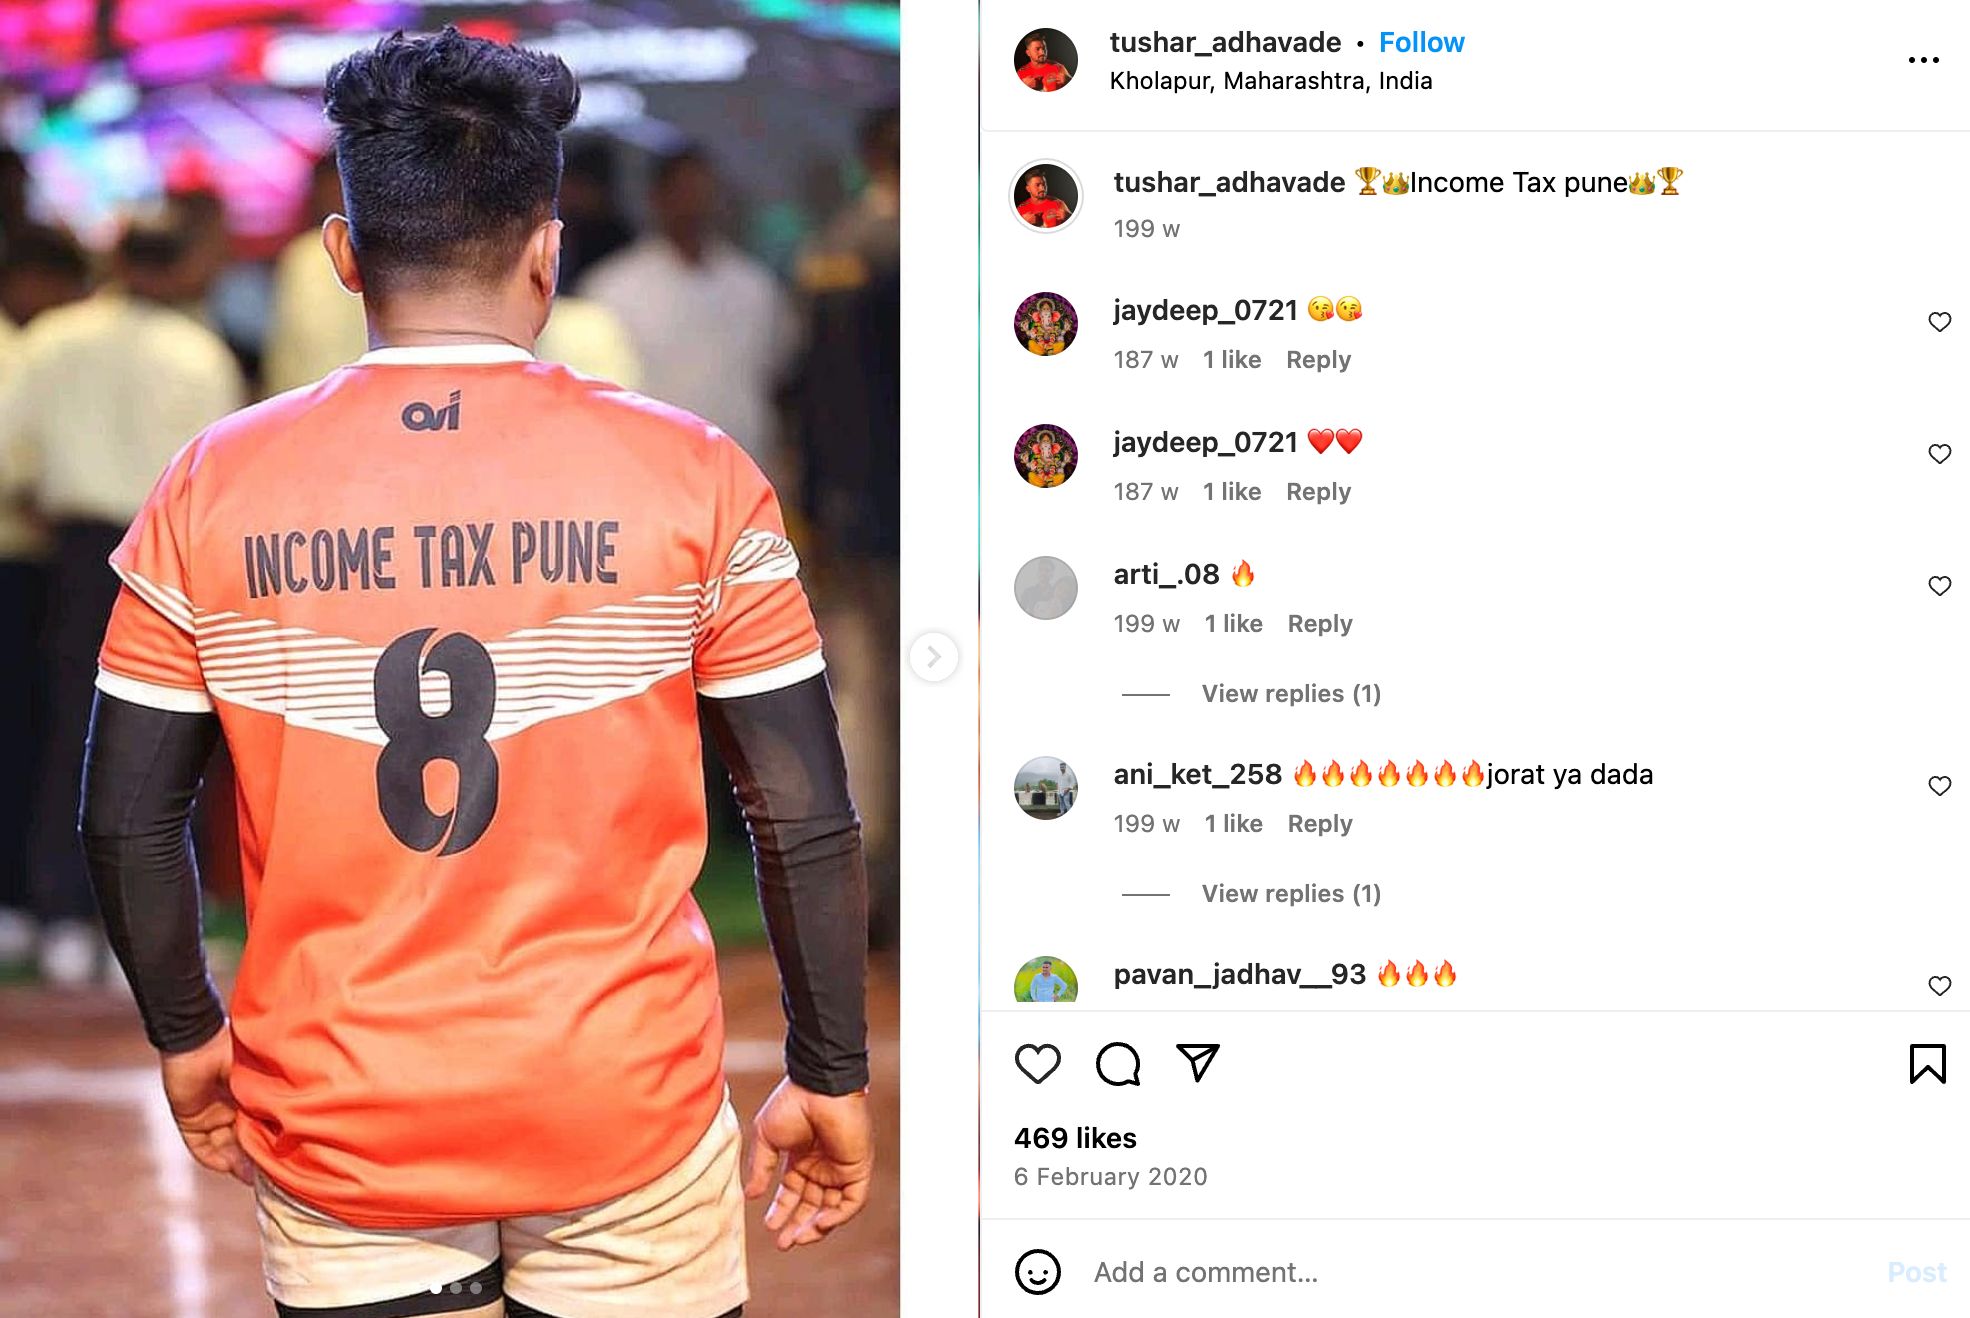 Tushar Dattaray Adhavade shared a post on Instagram wearing his jersey for the team Income Tax Pune